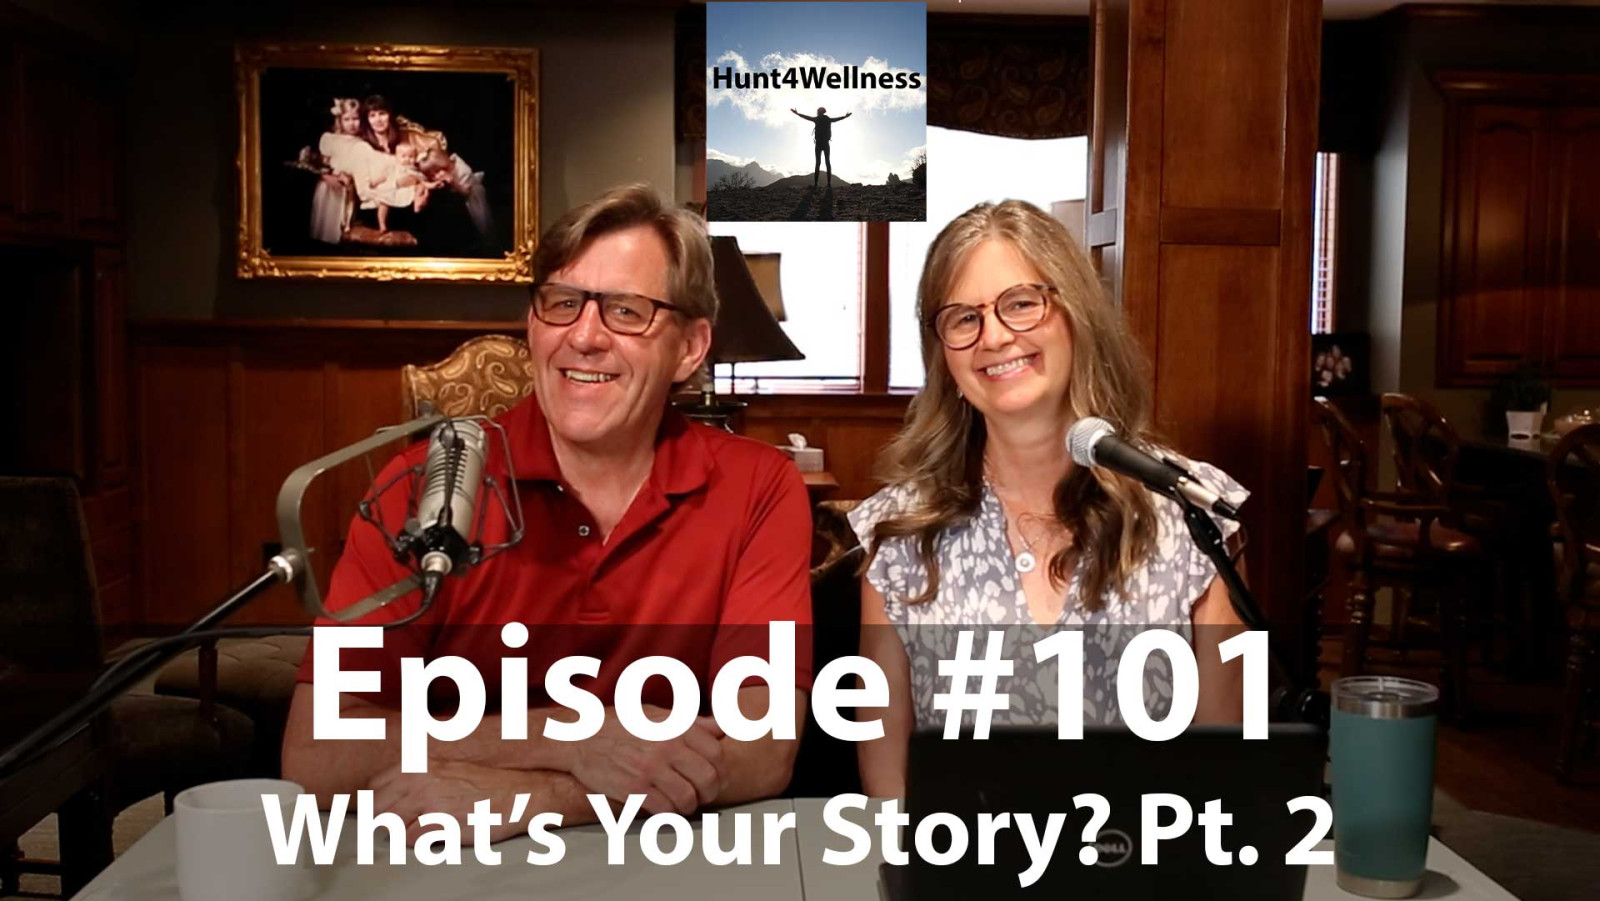 Episode #101 - What's Your Story? Pt. 2